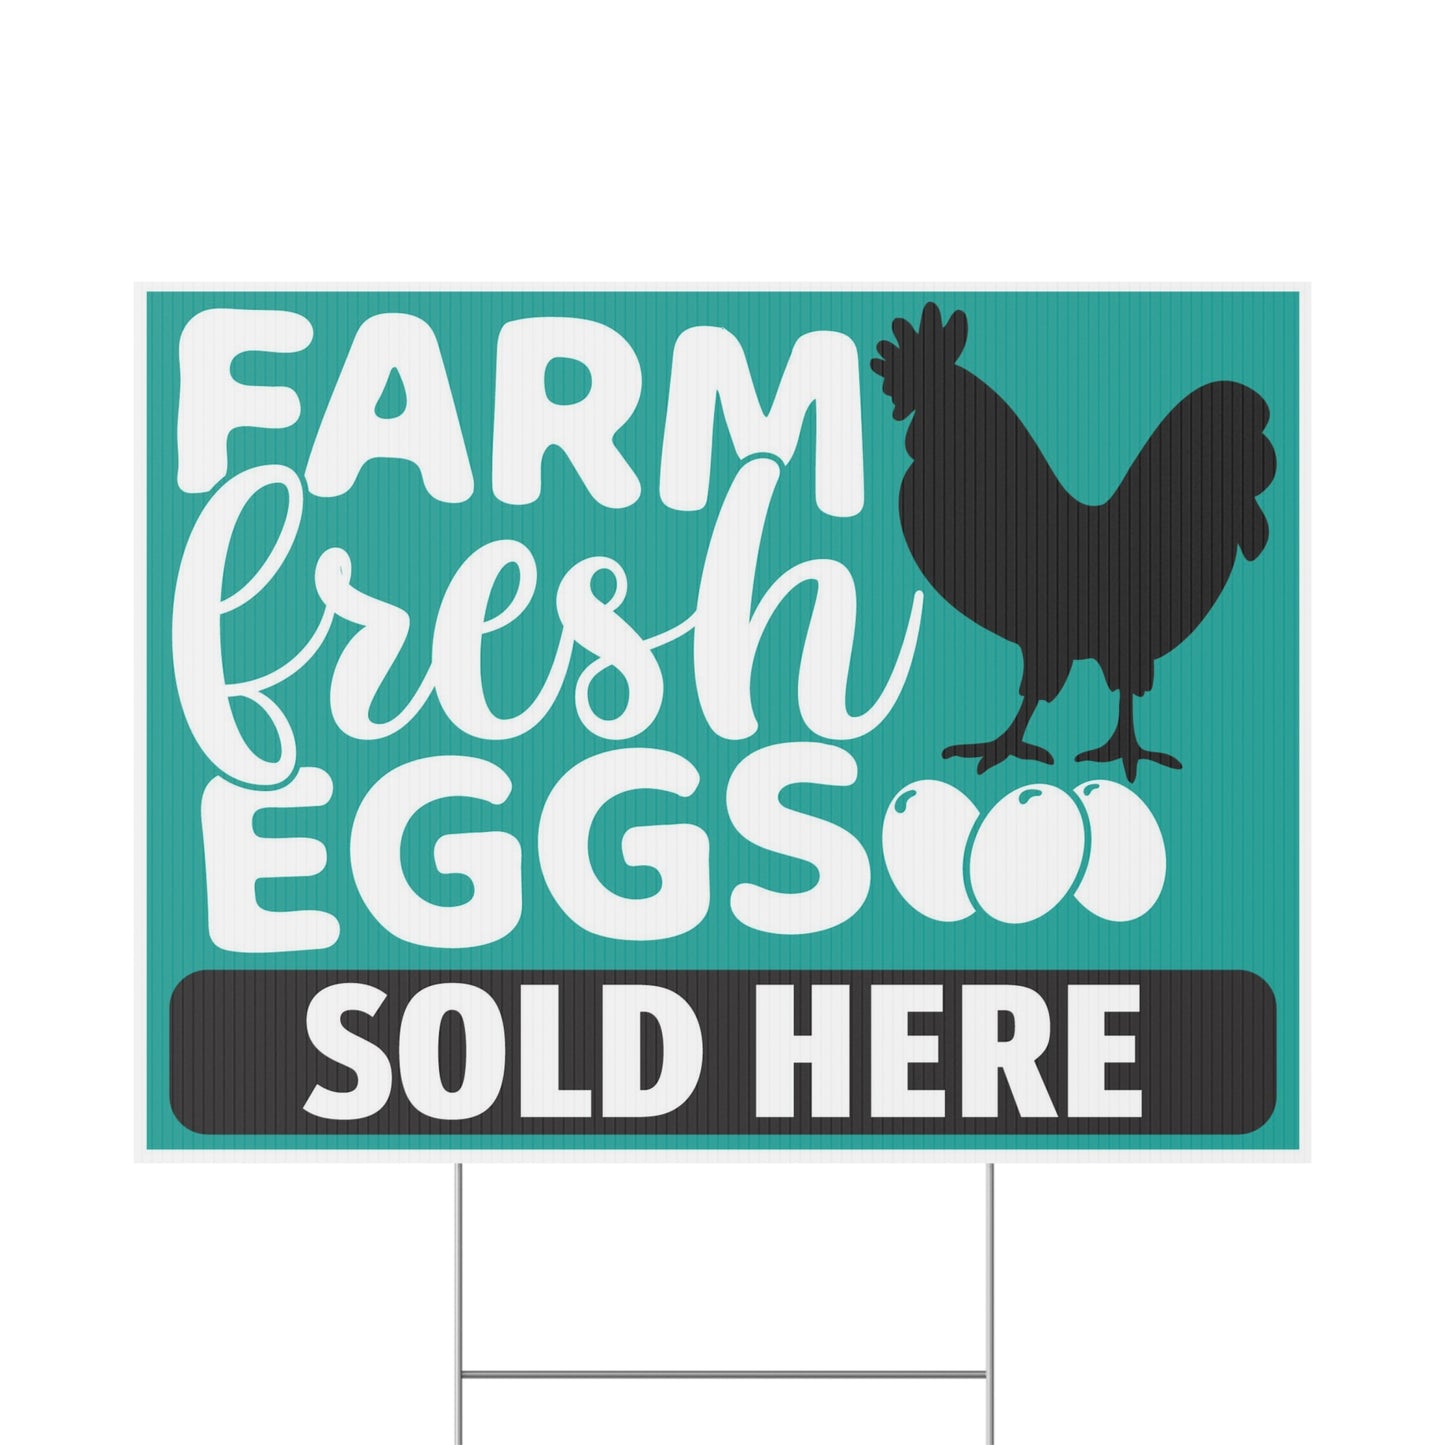 Farm Fresh Eggs Sold Here Yard Sign, 18x12, 24x18, 36x24, H-Stake Included, v1